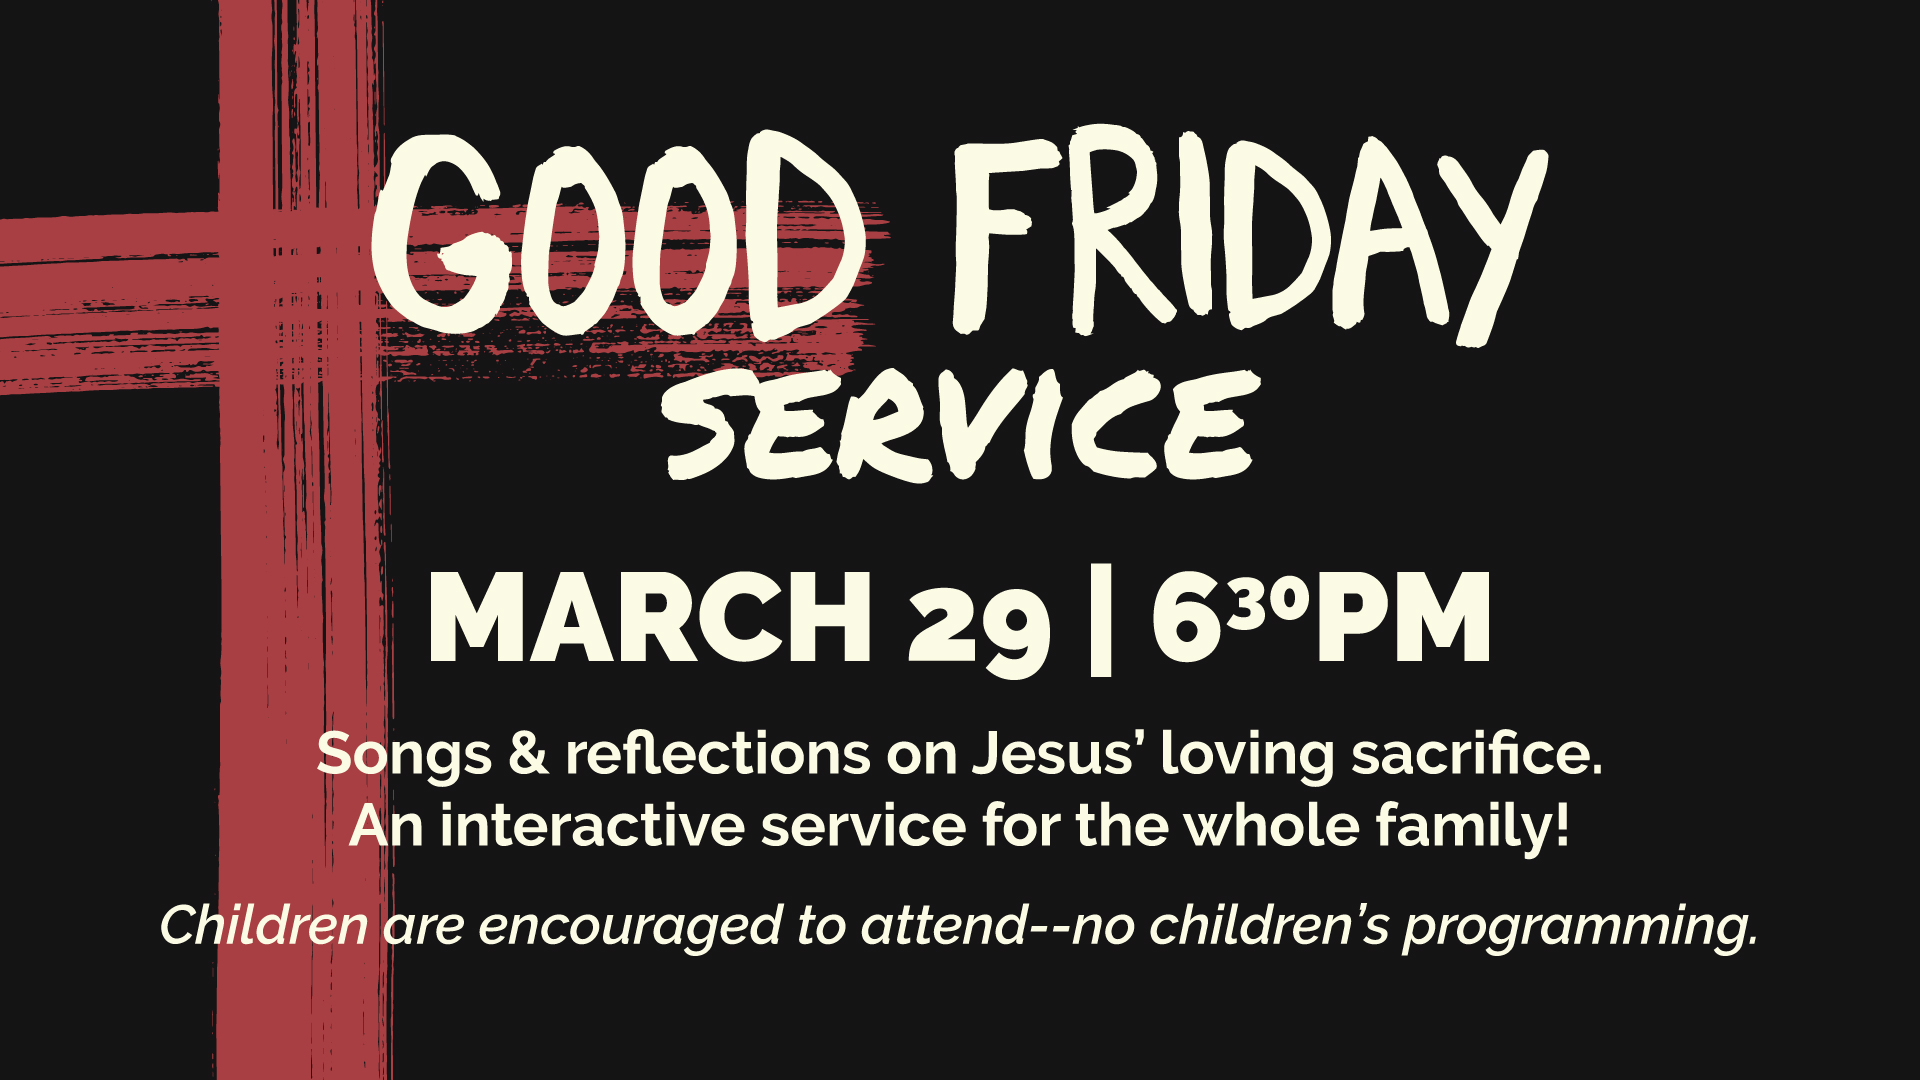 Good Friday Service | March 29 at 6:30pm | Songs and reflections on Jesus' loving sacrifice. An interactive service for the whole family. Children are encouraged to attend--no children's programming.